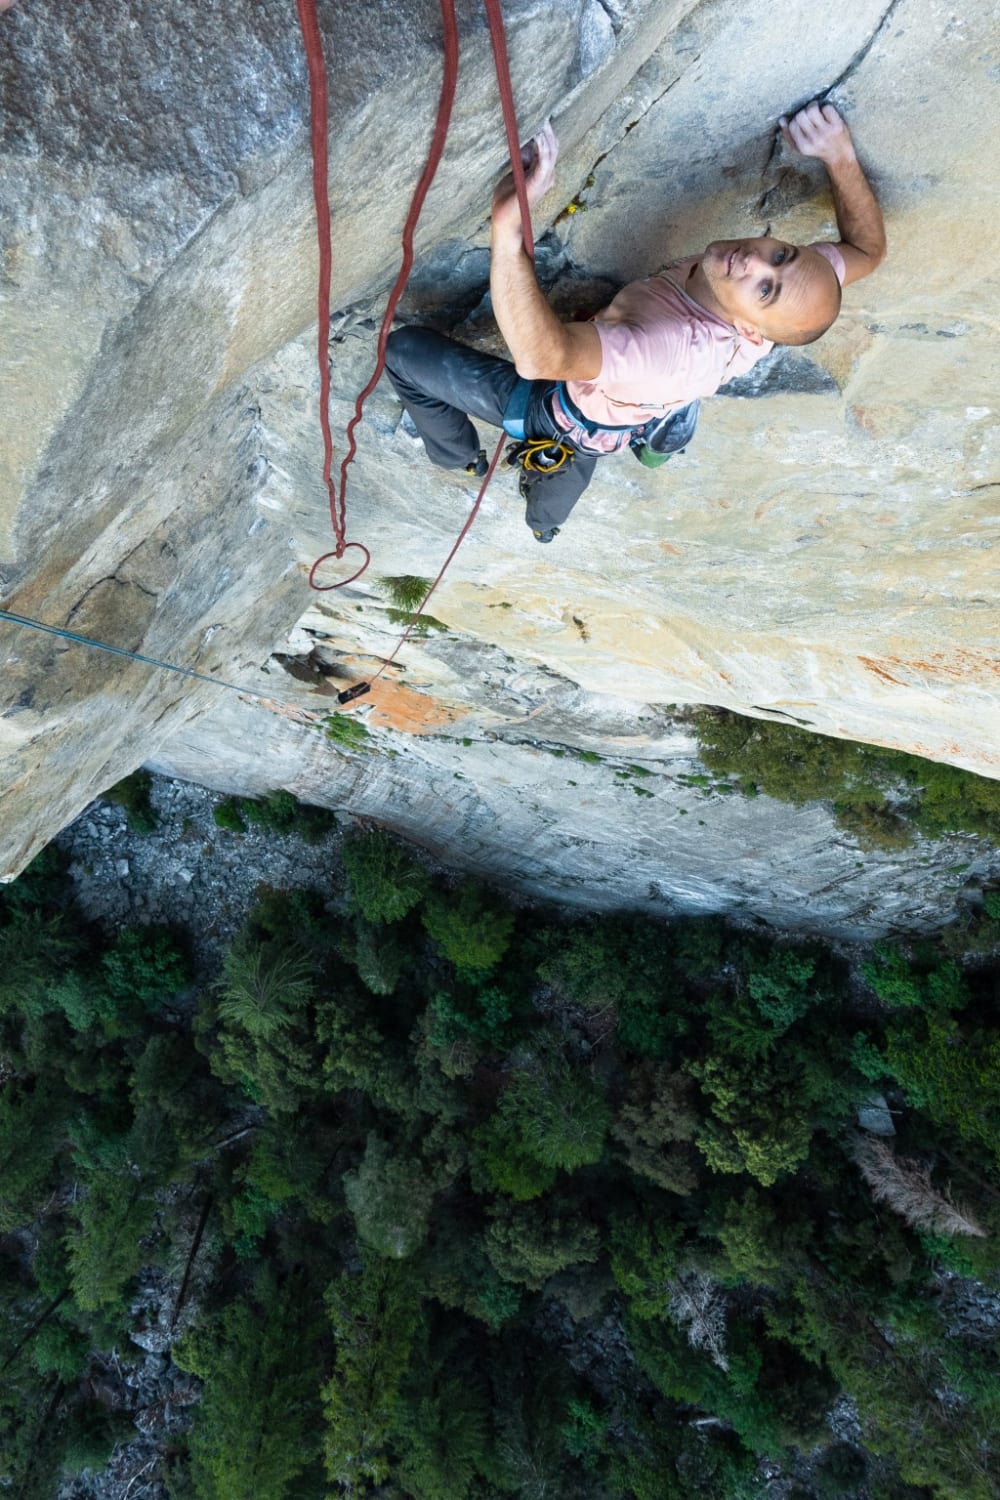 Chris Weidner: Top rope soloing is changing climbing